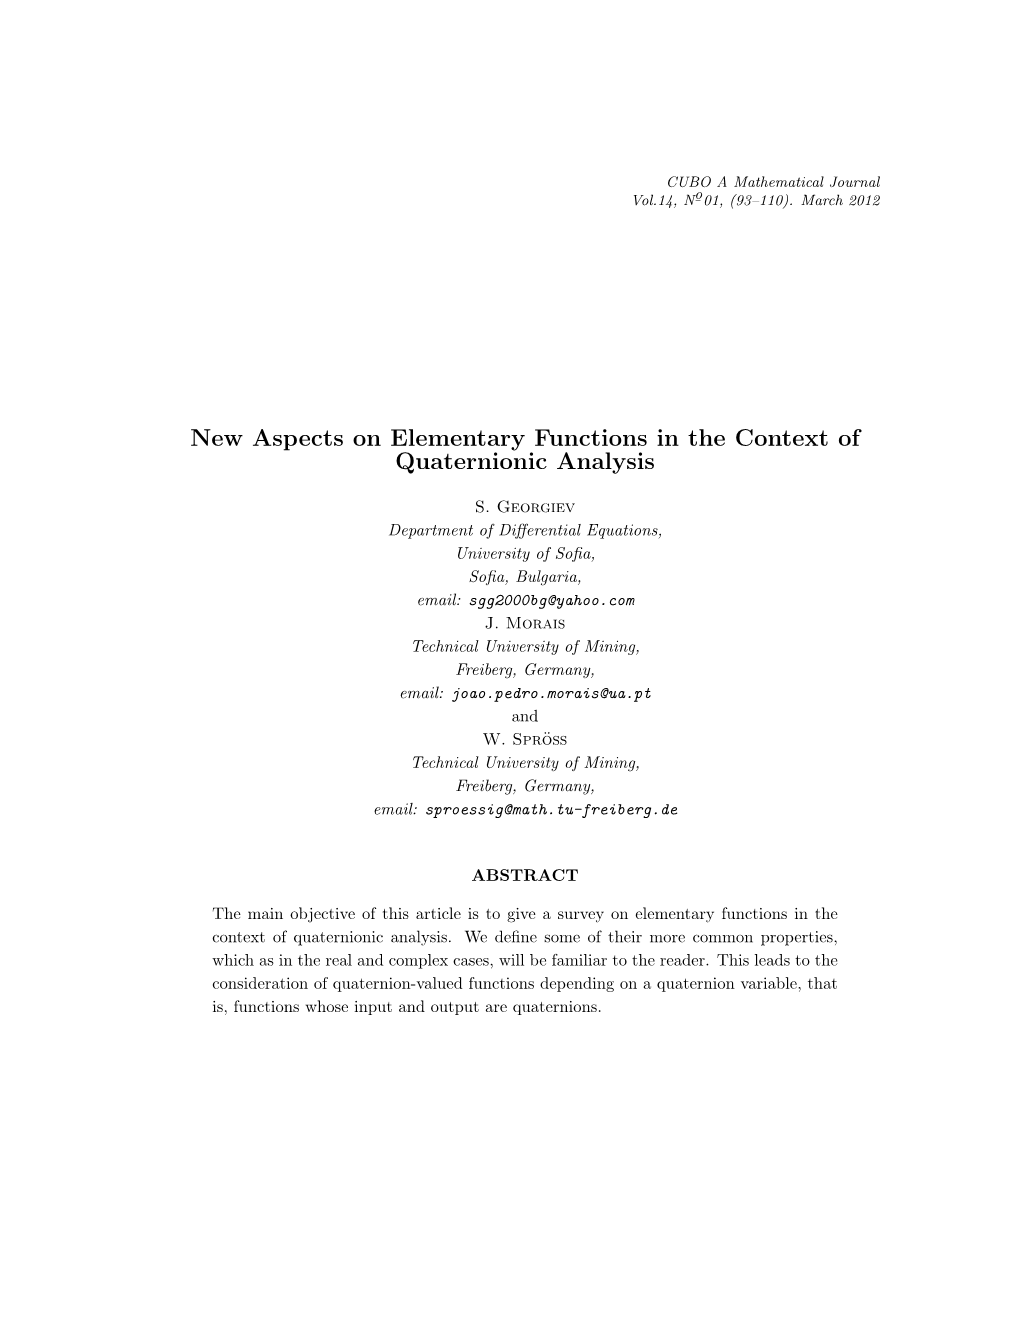 New Aspects on Elementary Functions in the Context of Quaternionic Analysis